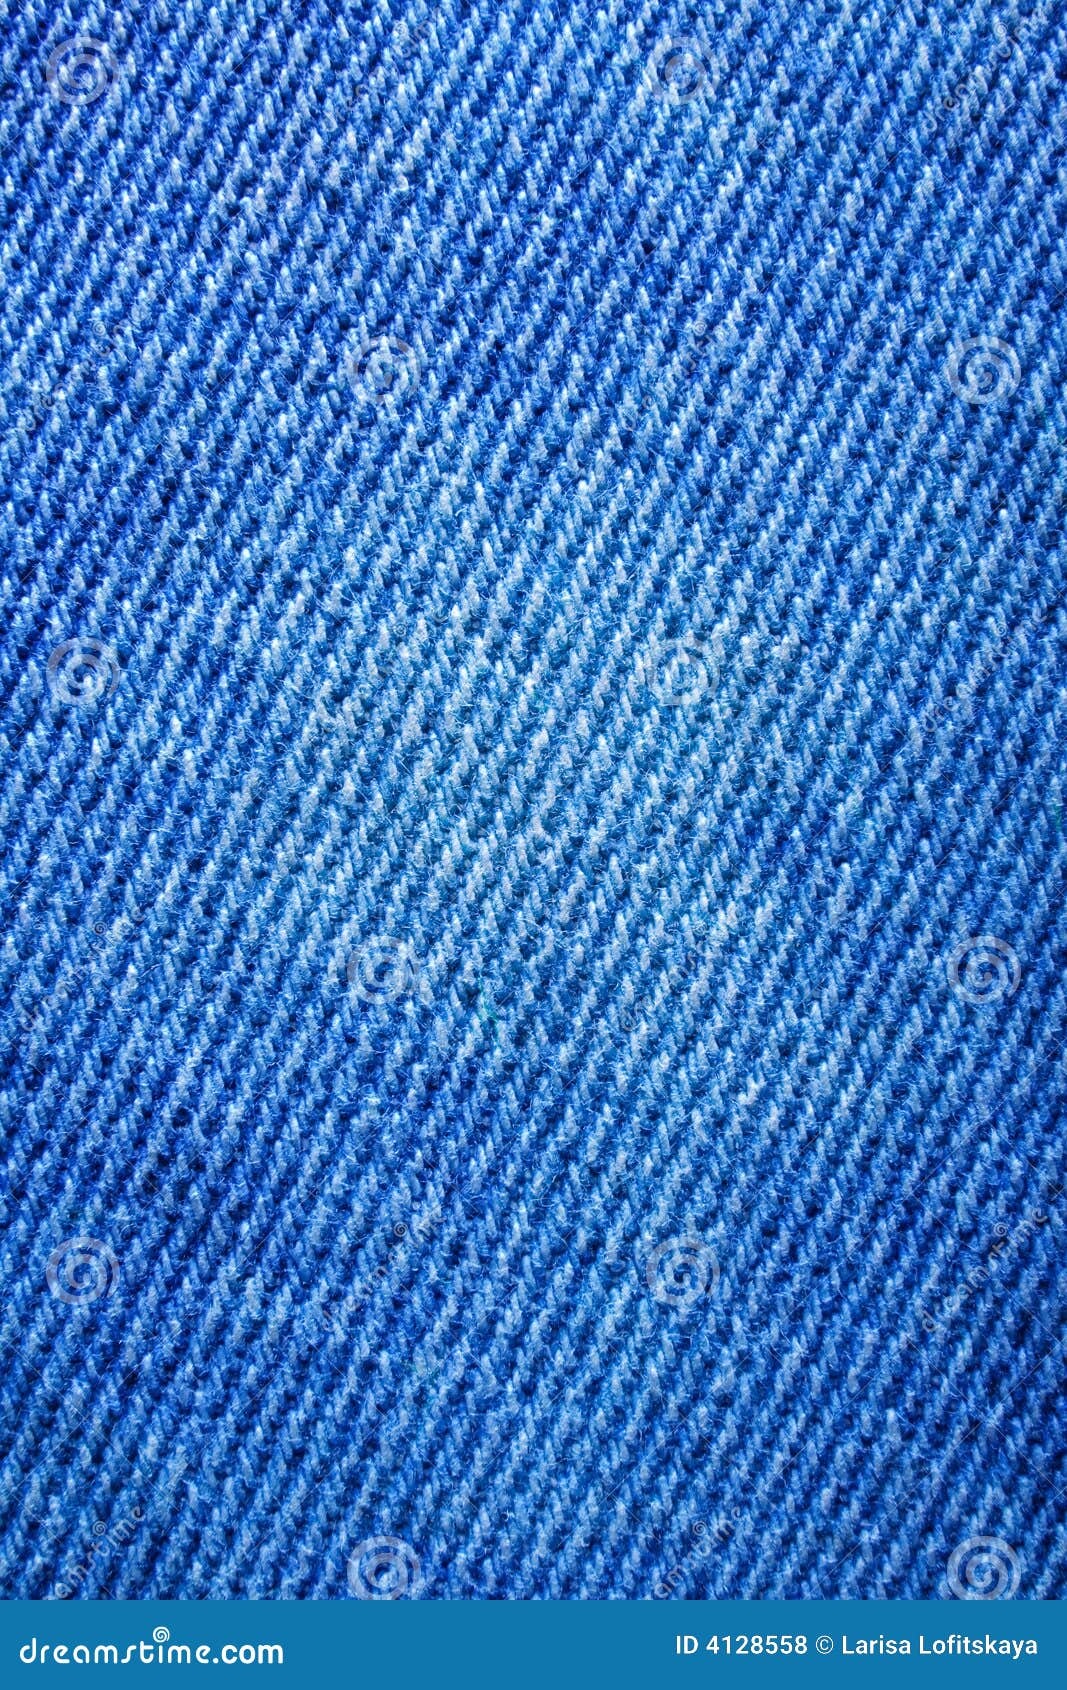 Texture of old jeans stock photo. Image of design, textured - 4128558